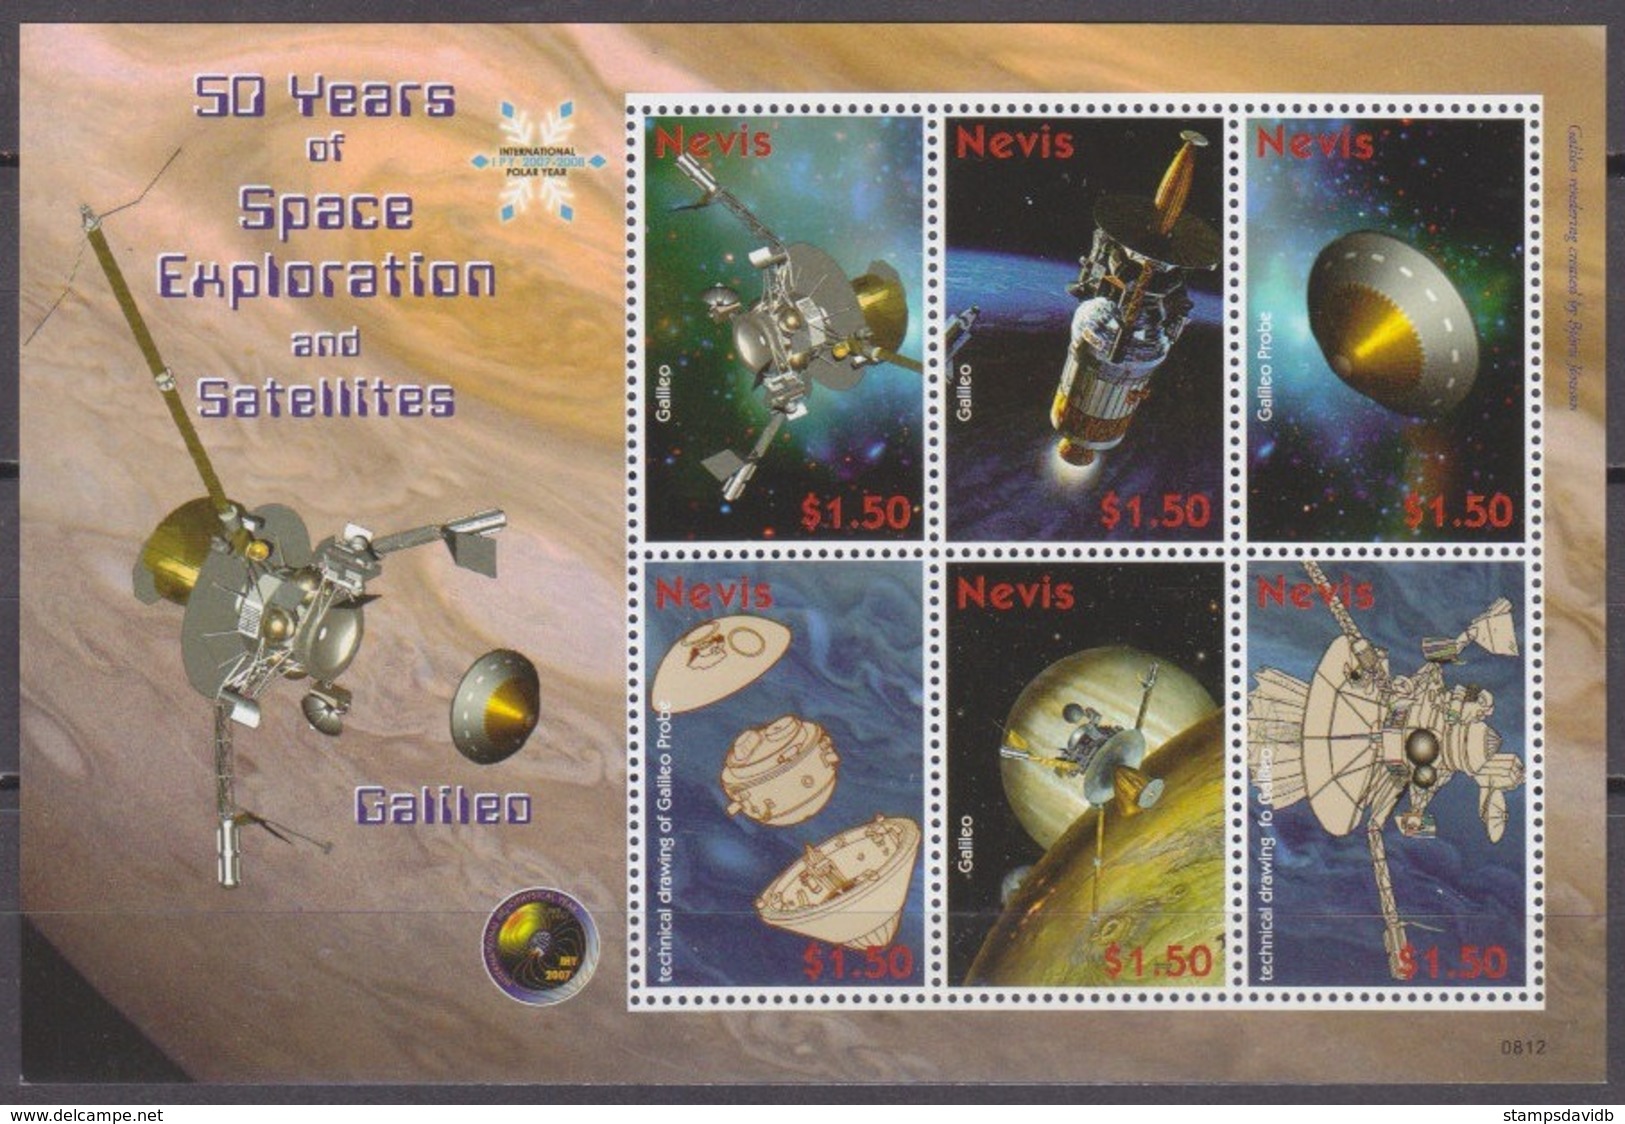 2008	Nevis	2302-07KL	50 Years Of Space Exploration And Satellites.	8,00 € - América Del Norte